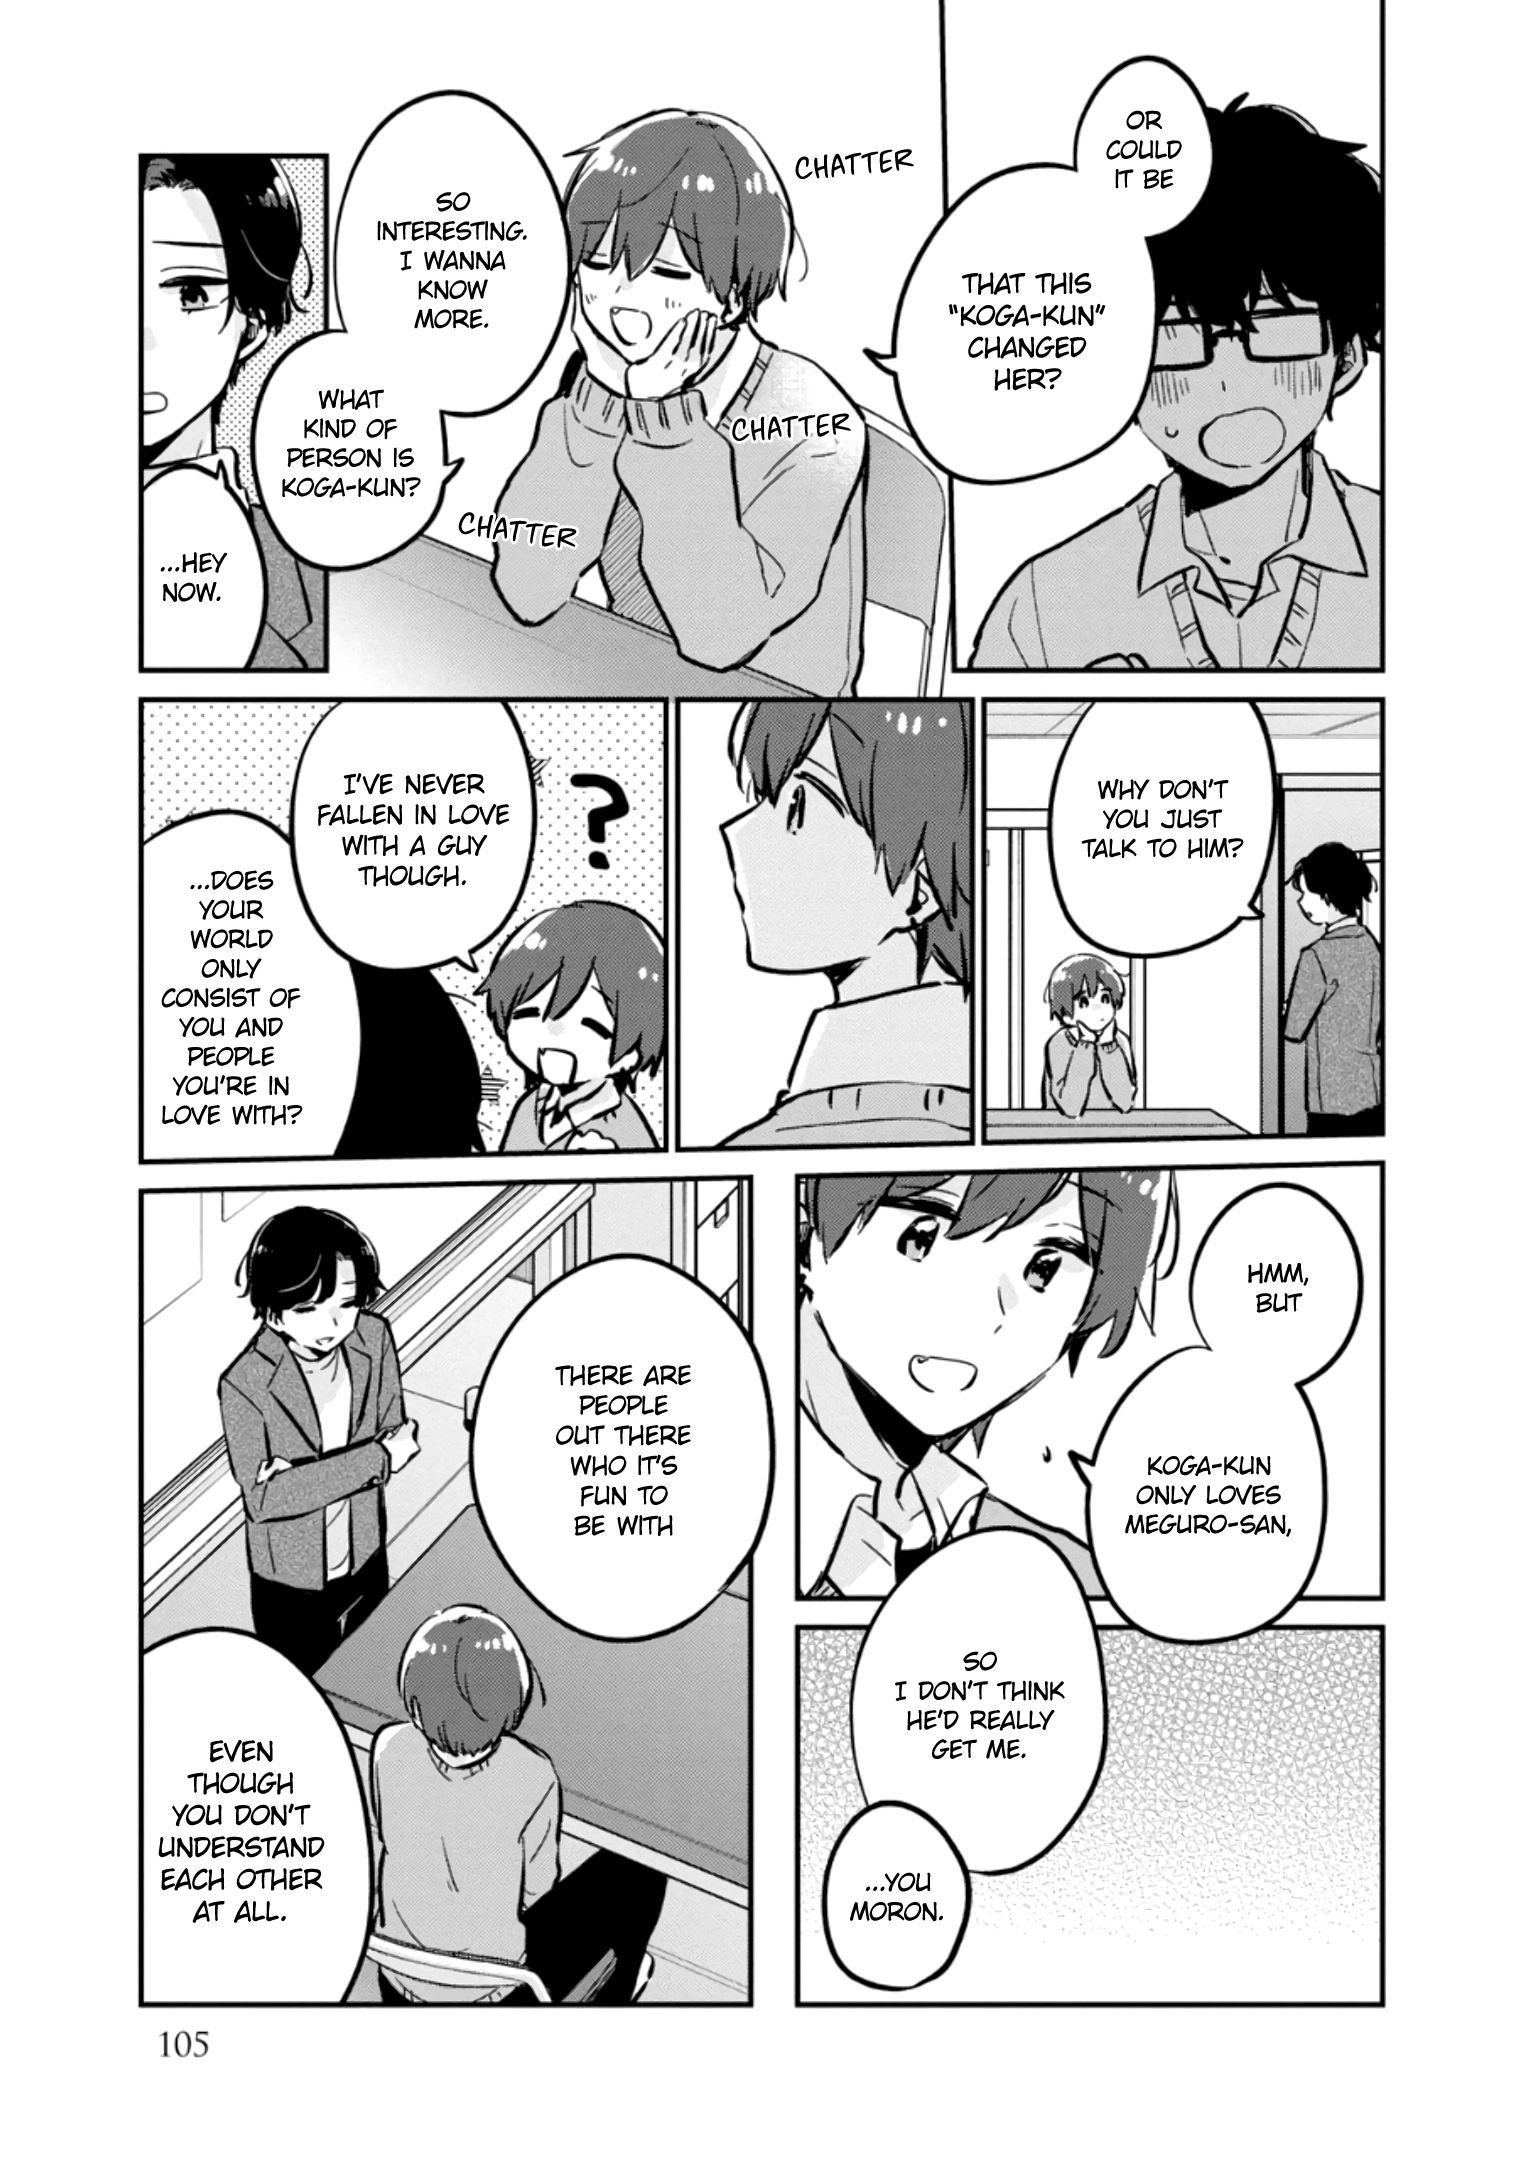 It's Not Meguro-san's First Time chapter 38.5 page 12